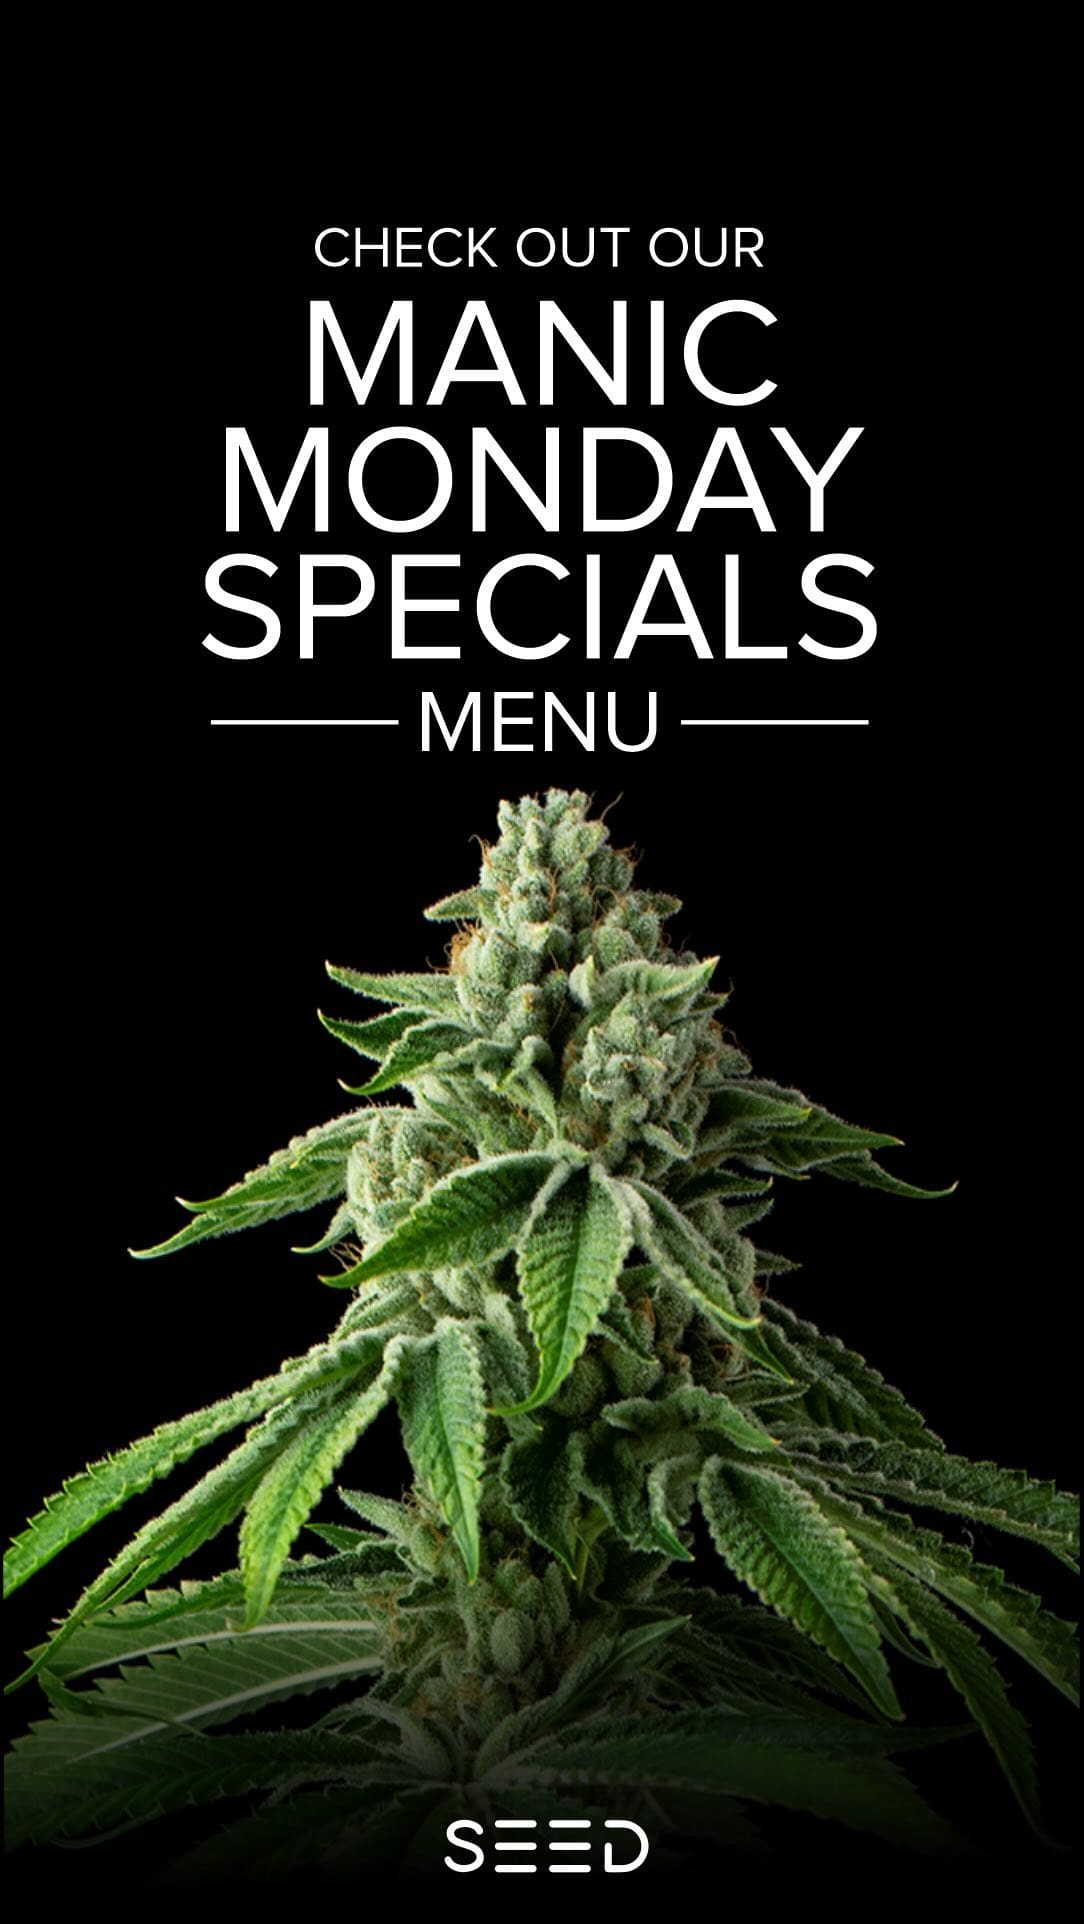 Check out Our menu for
New Manic Mondays Specials
Link in bio